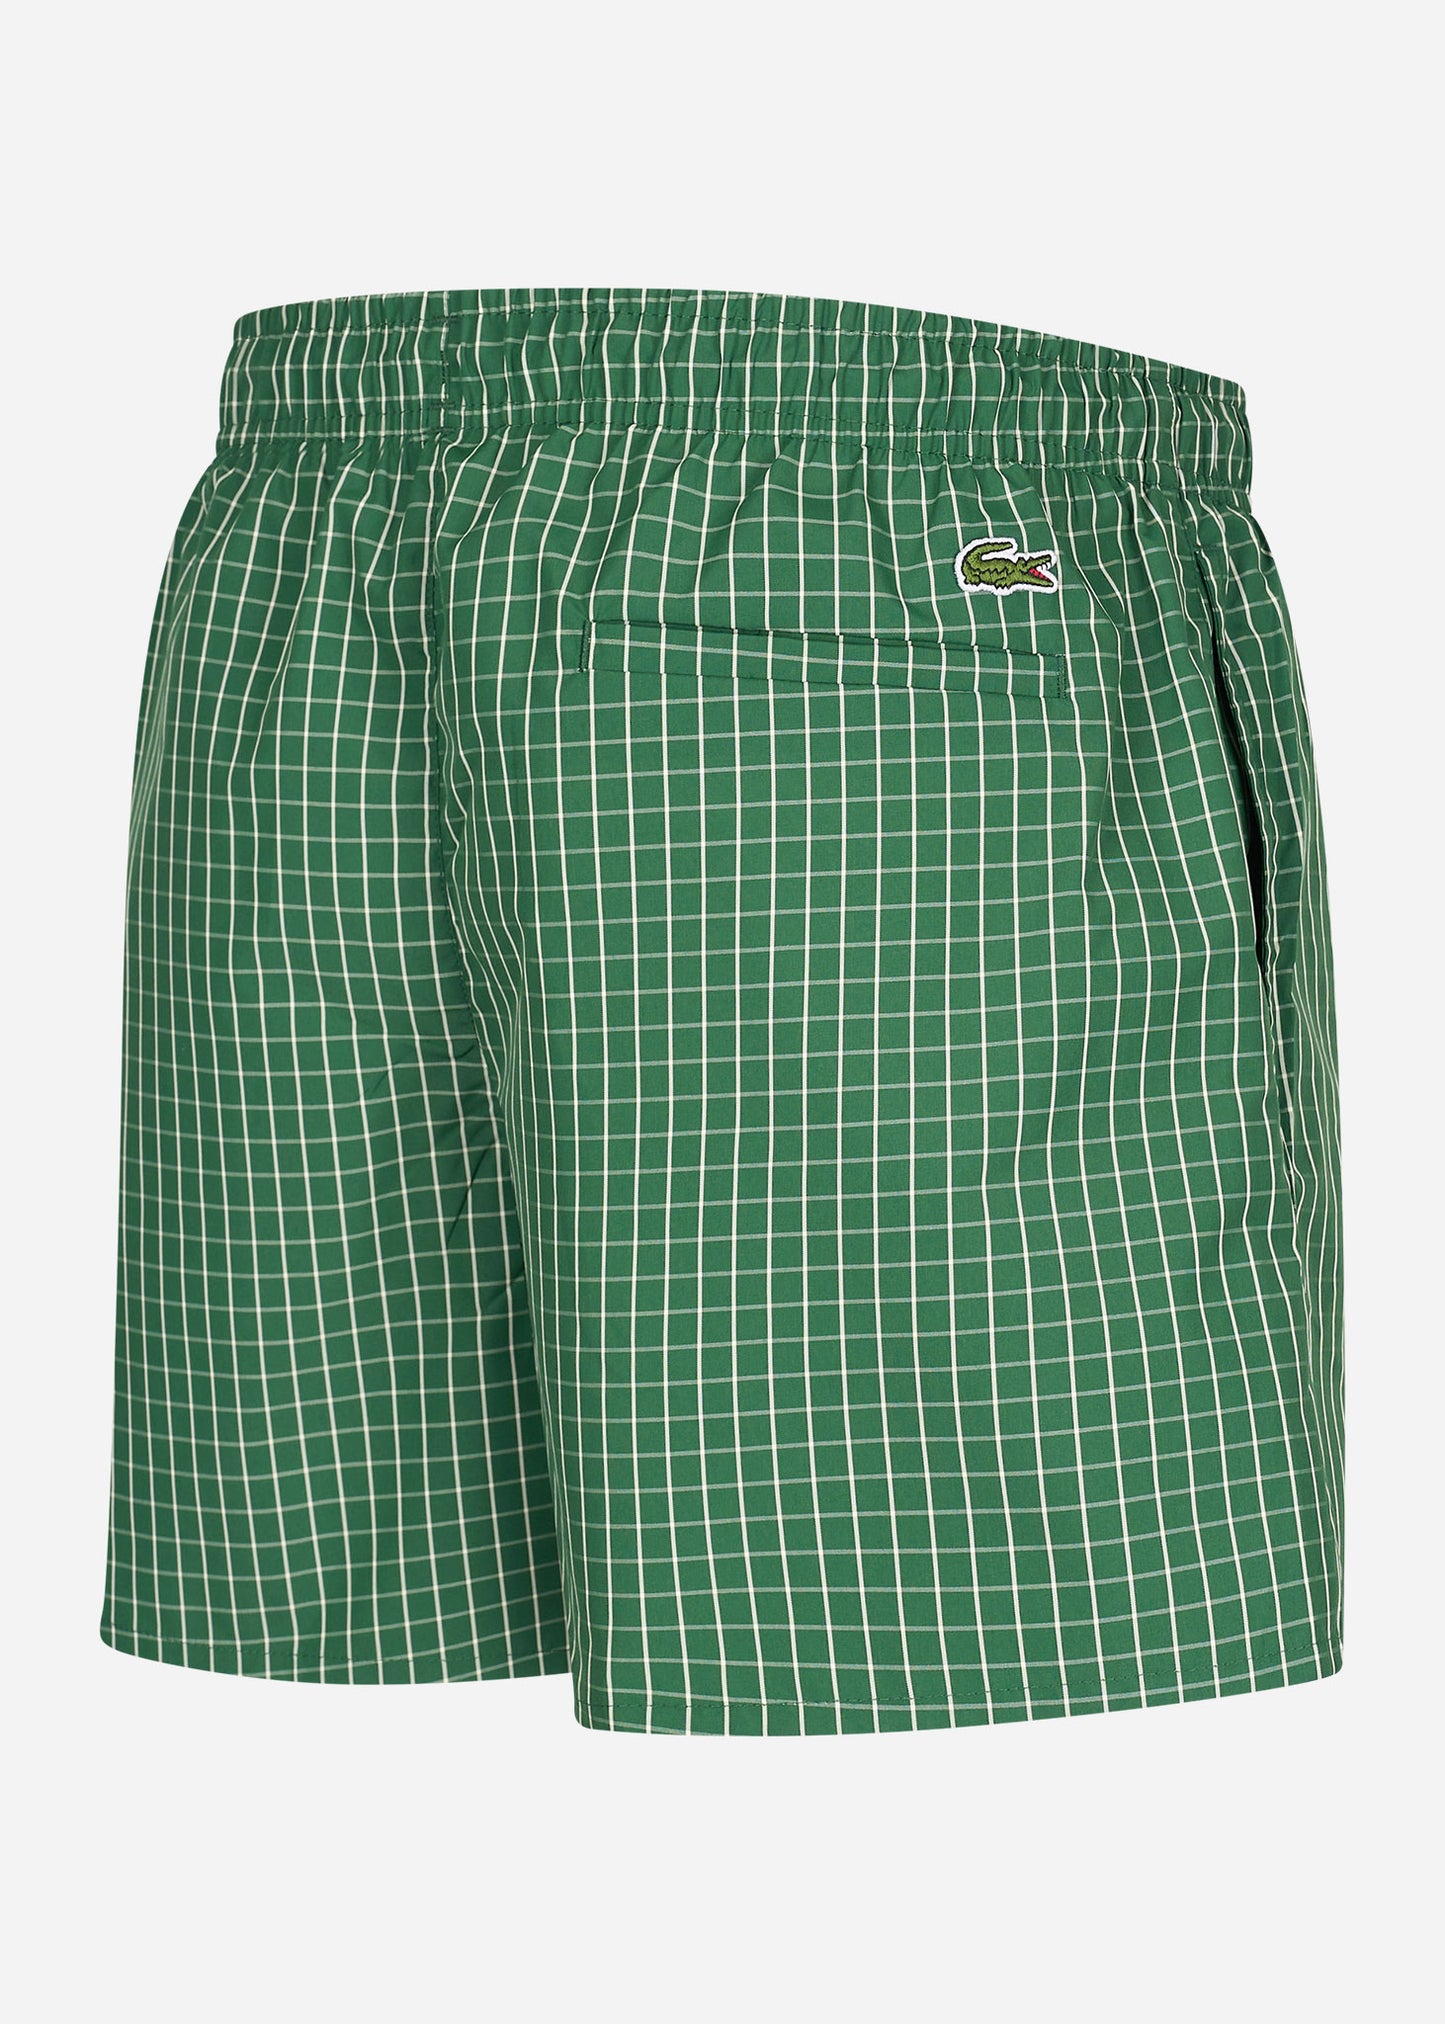 Checkered swimming trunks - green lapland